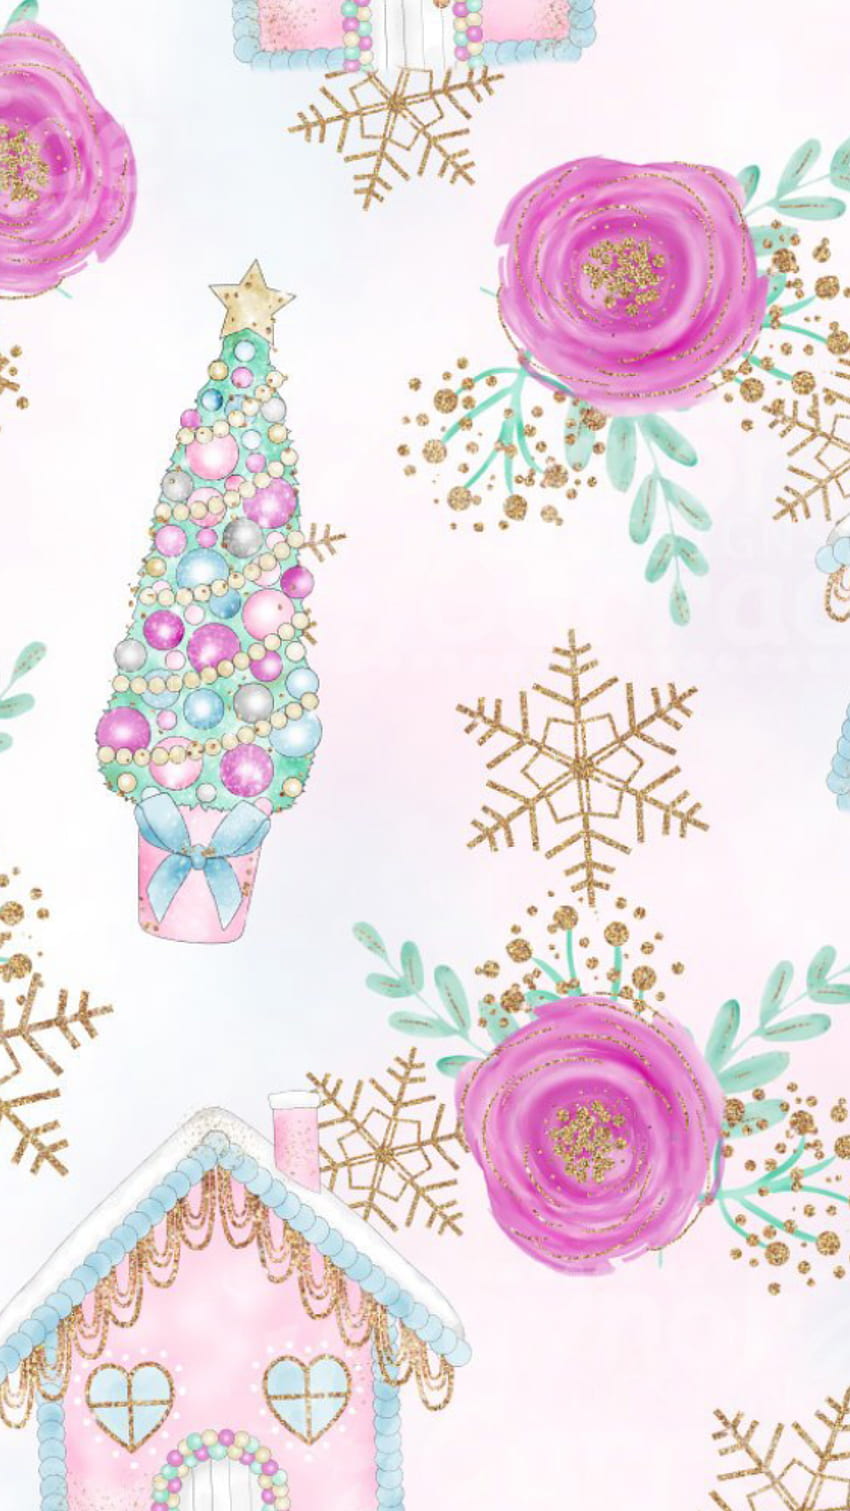 2560x800px, 2K Free download | Christmas Girly, Cute Vintage Girly HD ...